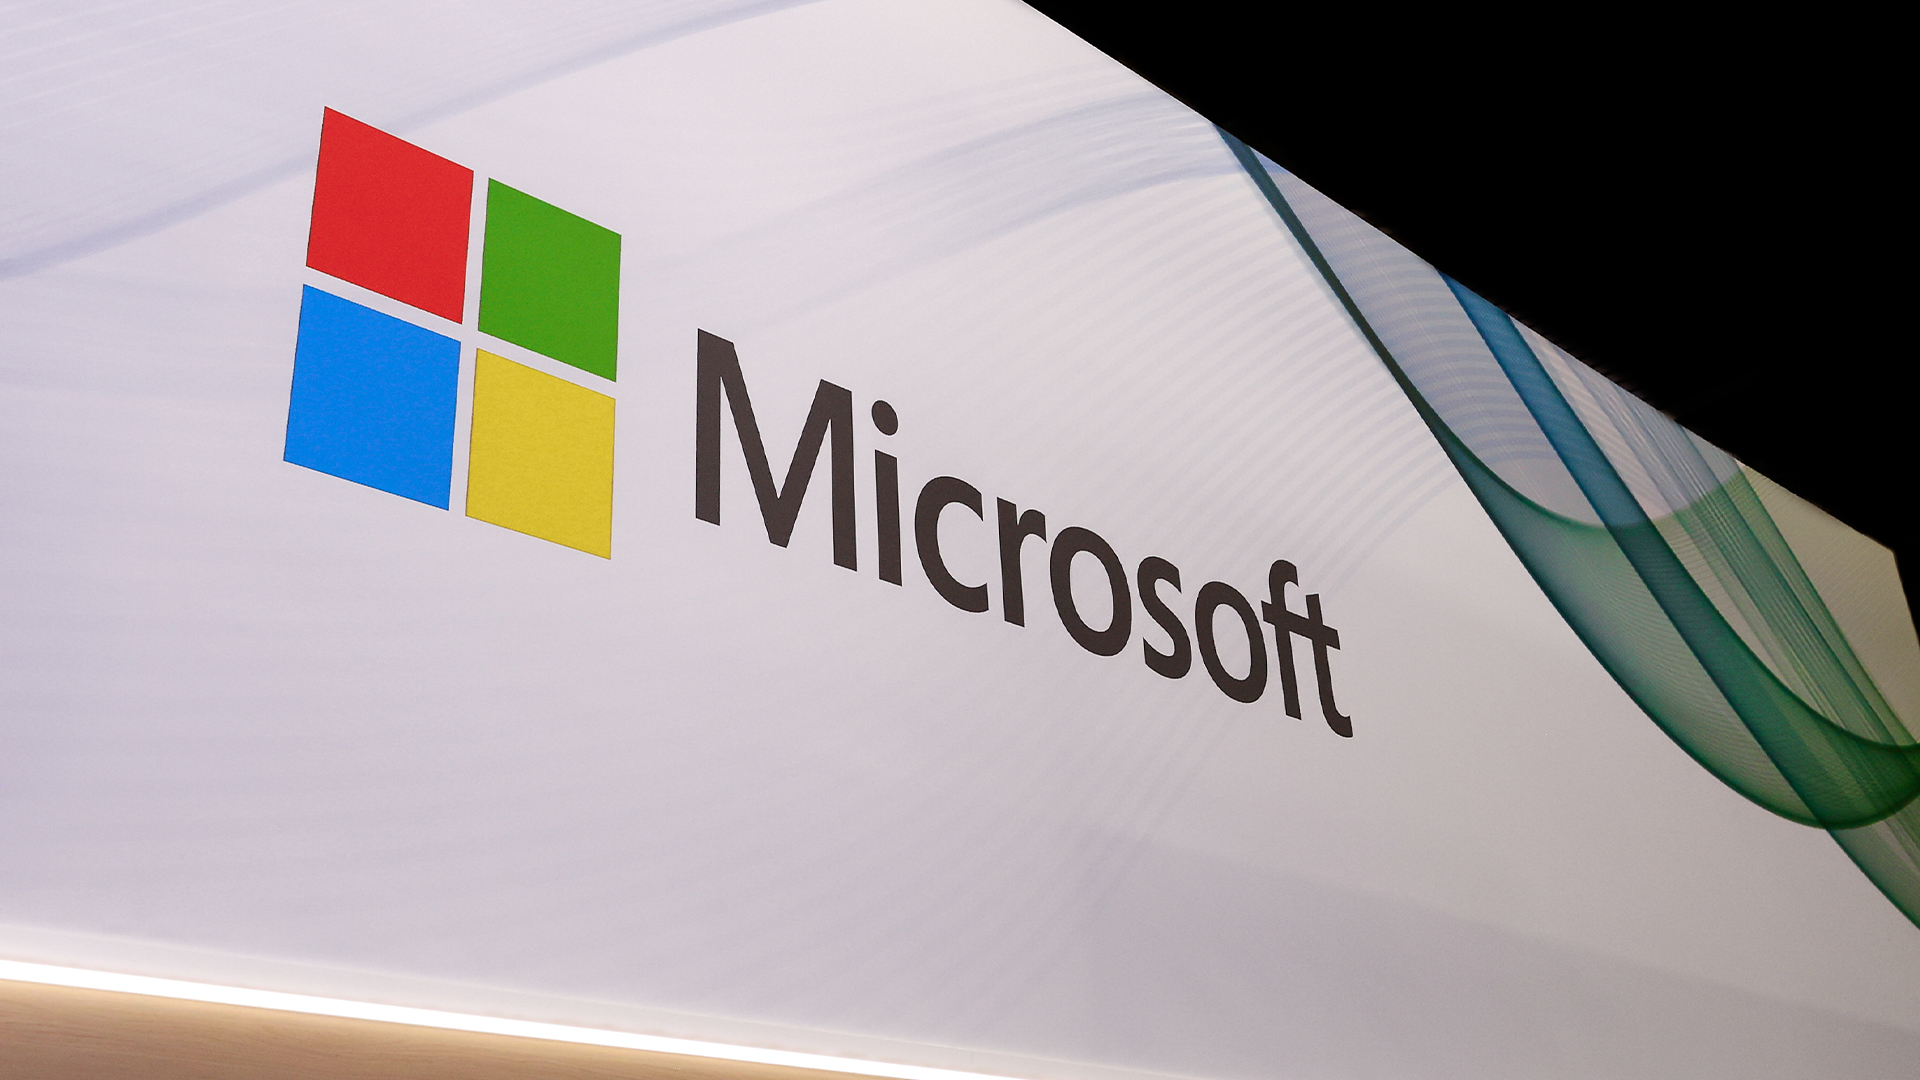 Microsoft's internal passwords left exposed for a month in latest security bug